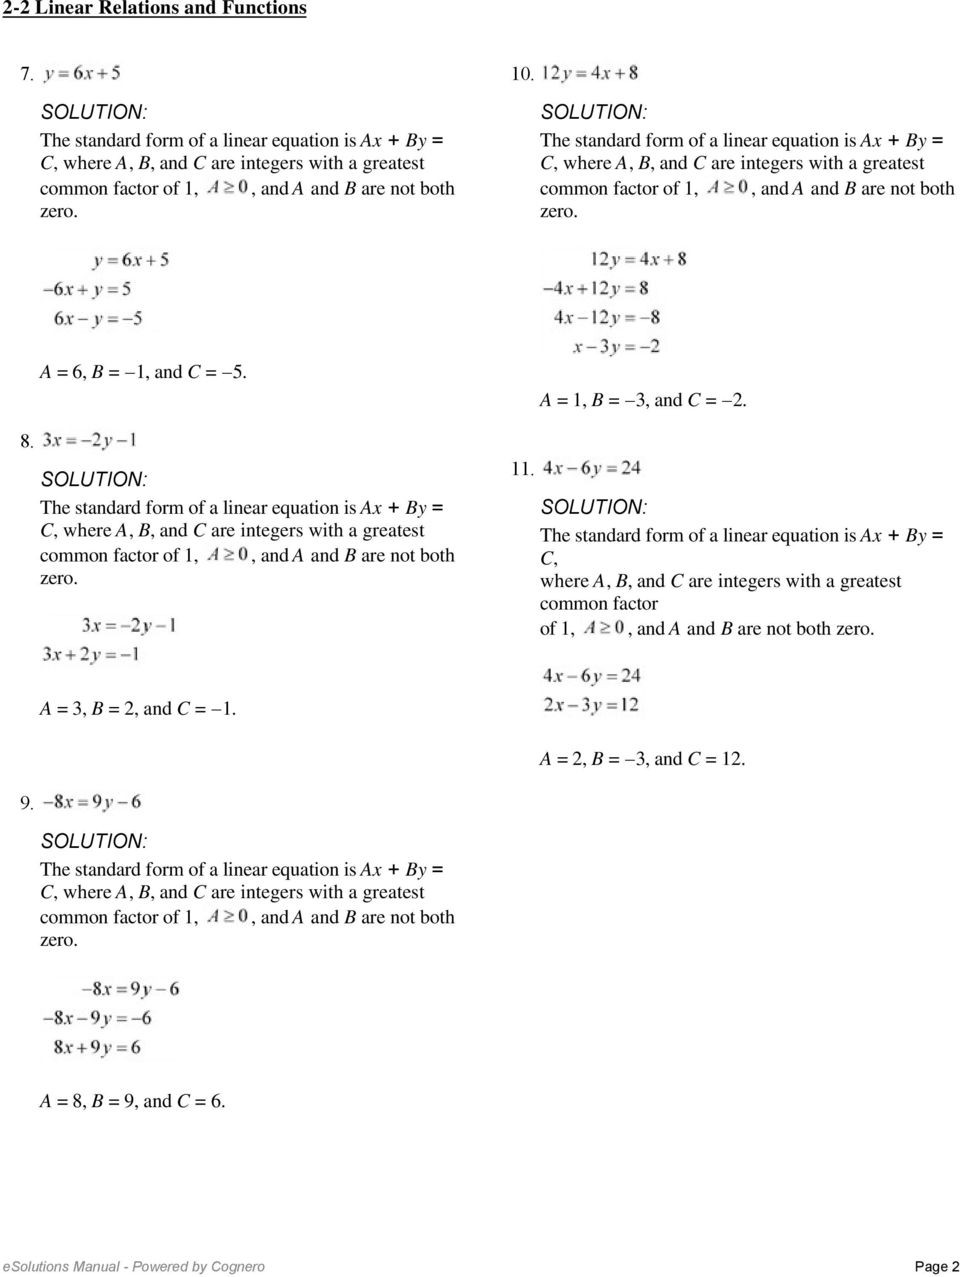 Linear Functions Word Problems Worksheet 2 2 Linear Relations and Functions so the Function is